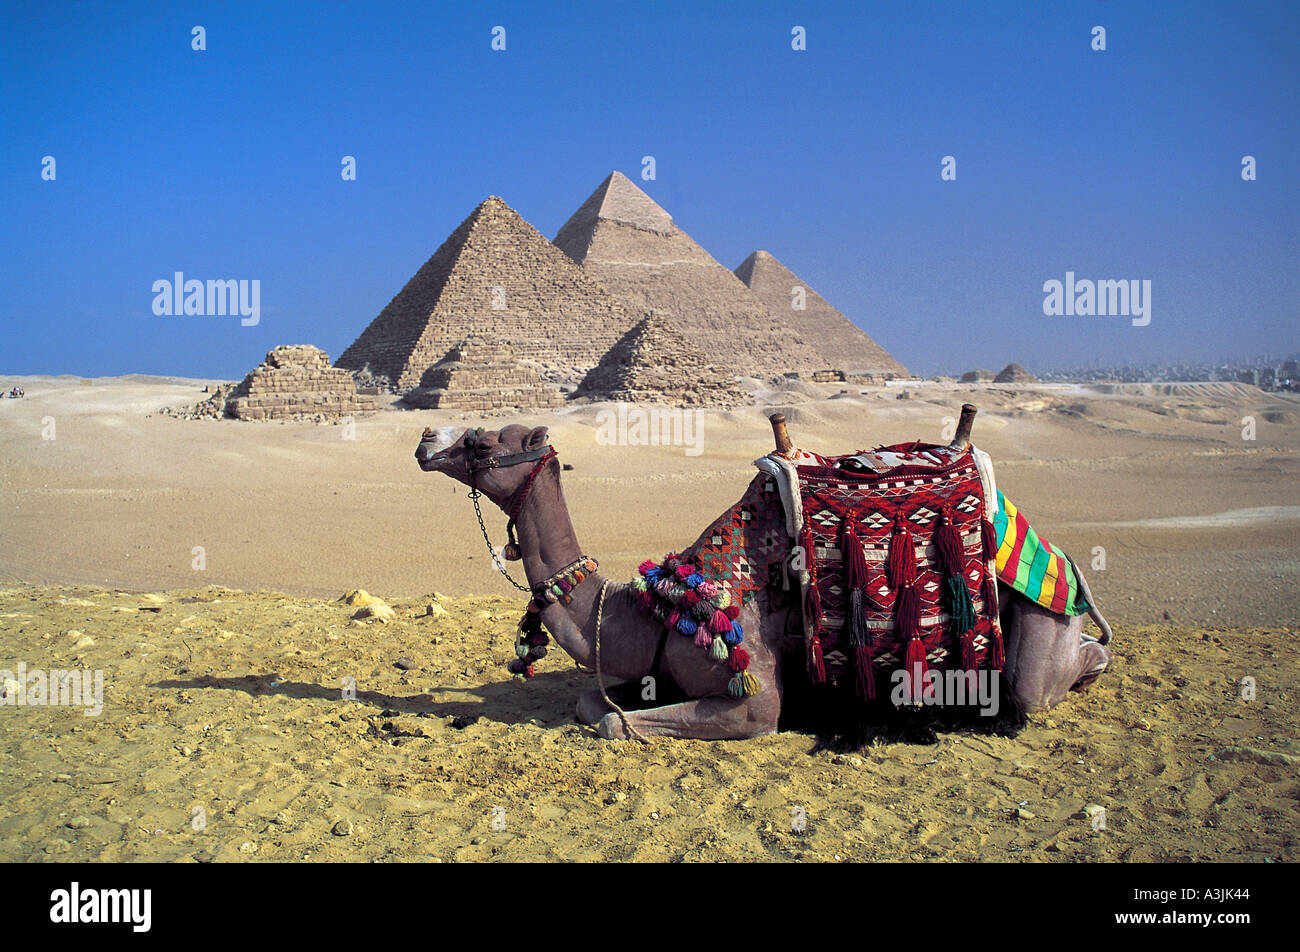 pyramid of mykerinos front and pyramid of kephren middle and pyramid of keops behind area of gizeh egypt Stock Photo